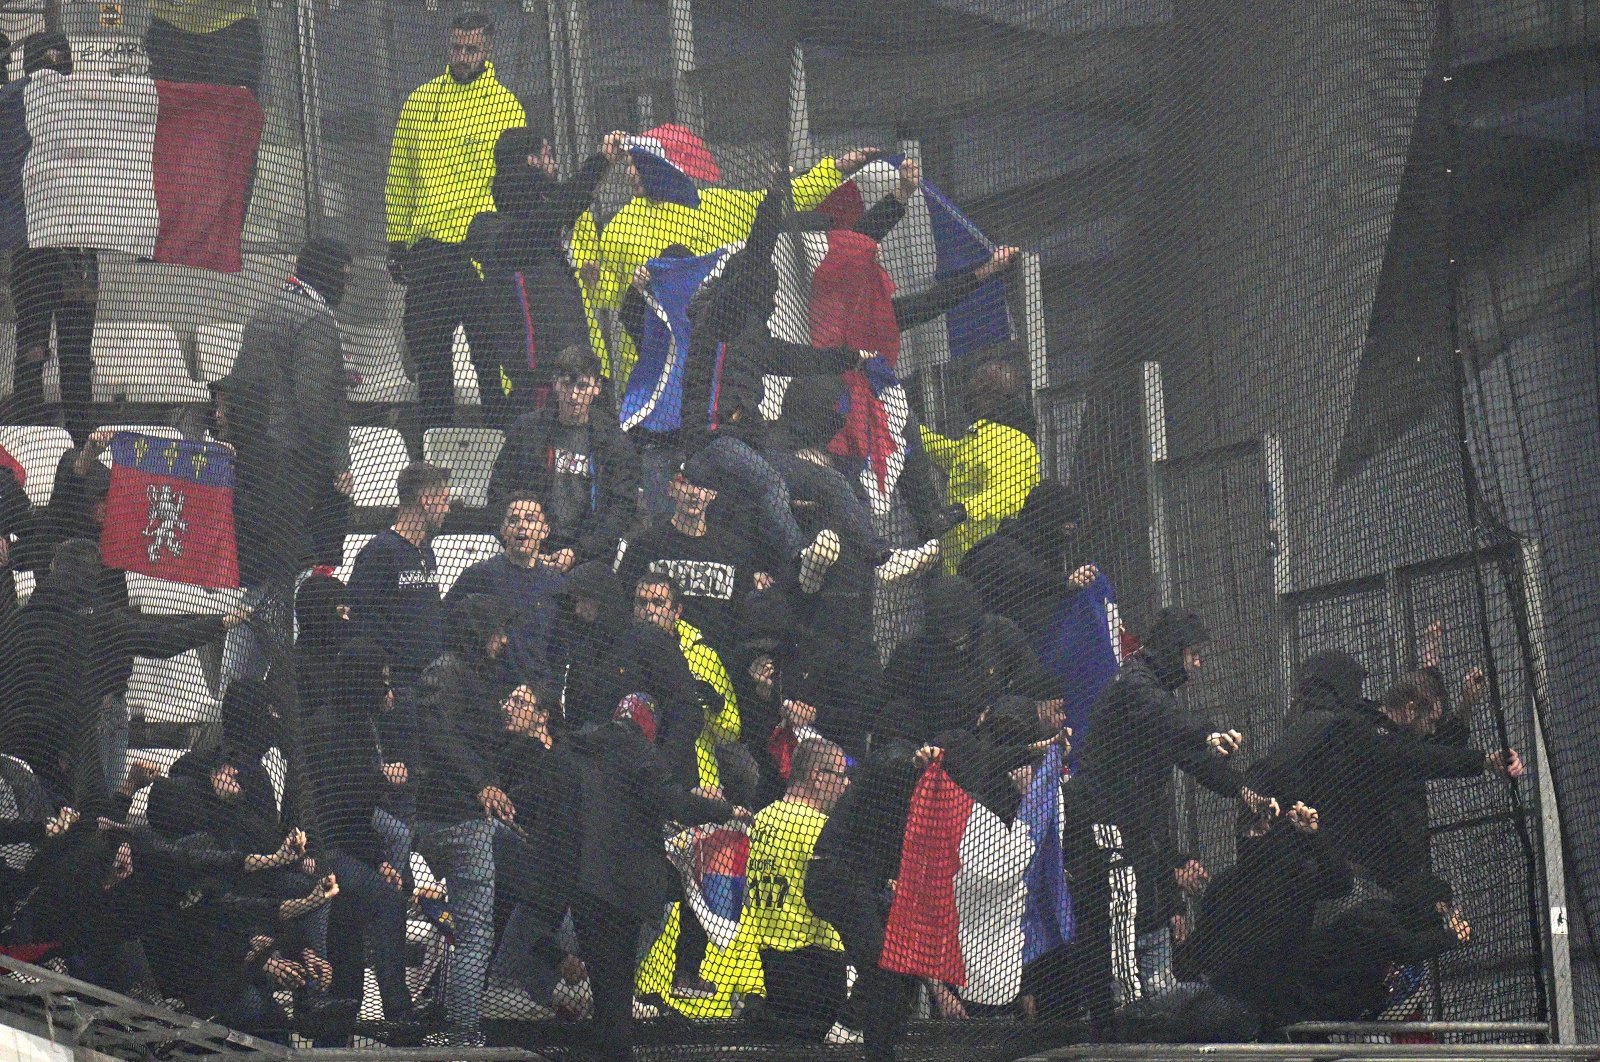 French Ligue 1 grapples with violence, racial slurs, bland matches